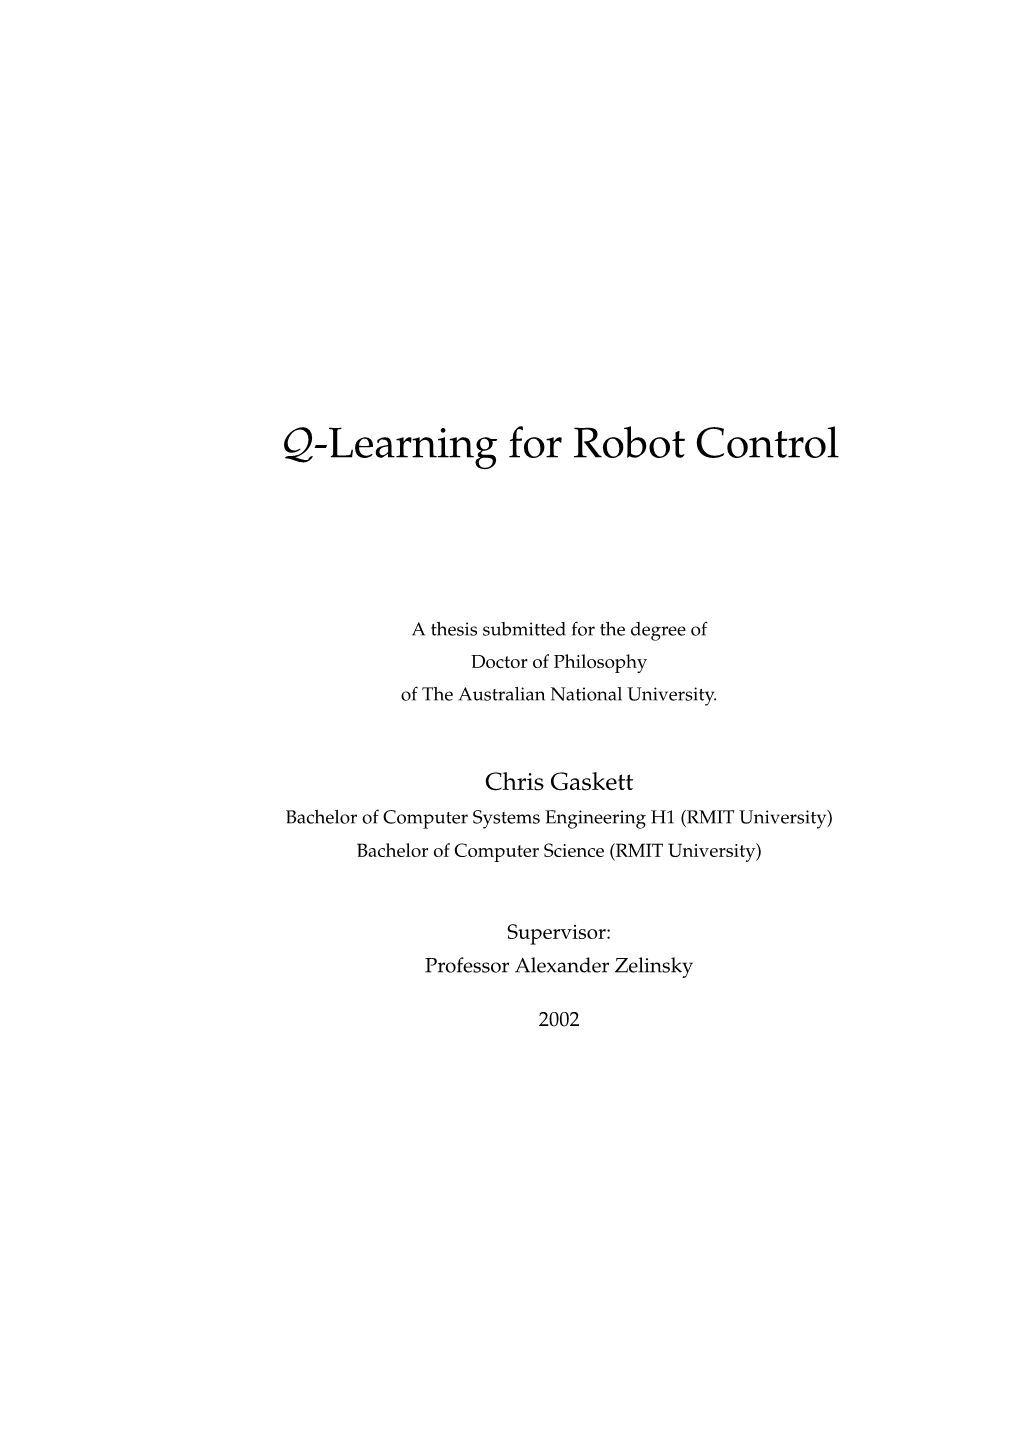 Q-Learning for Robot Control